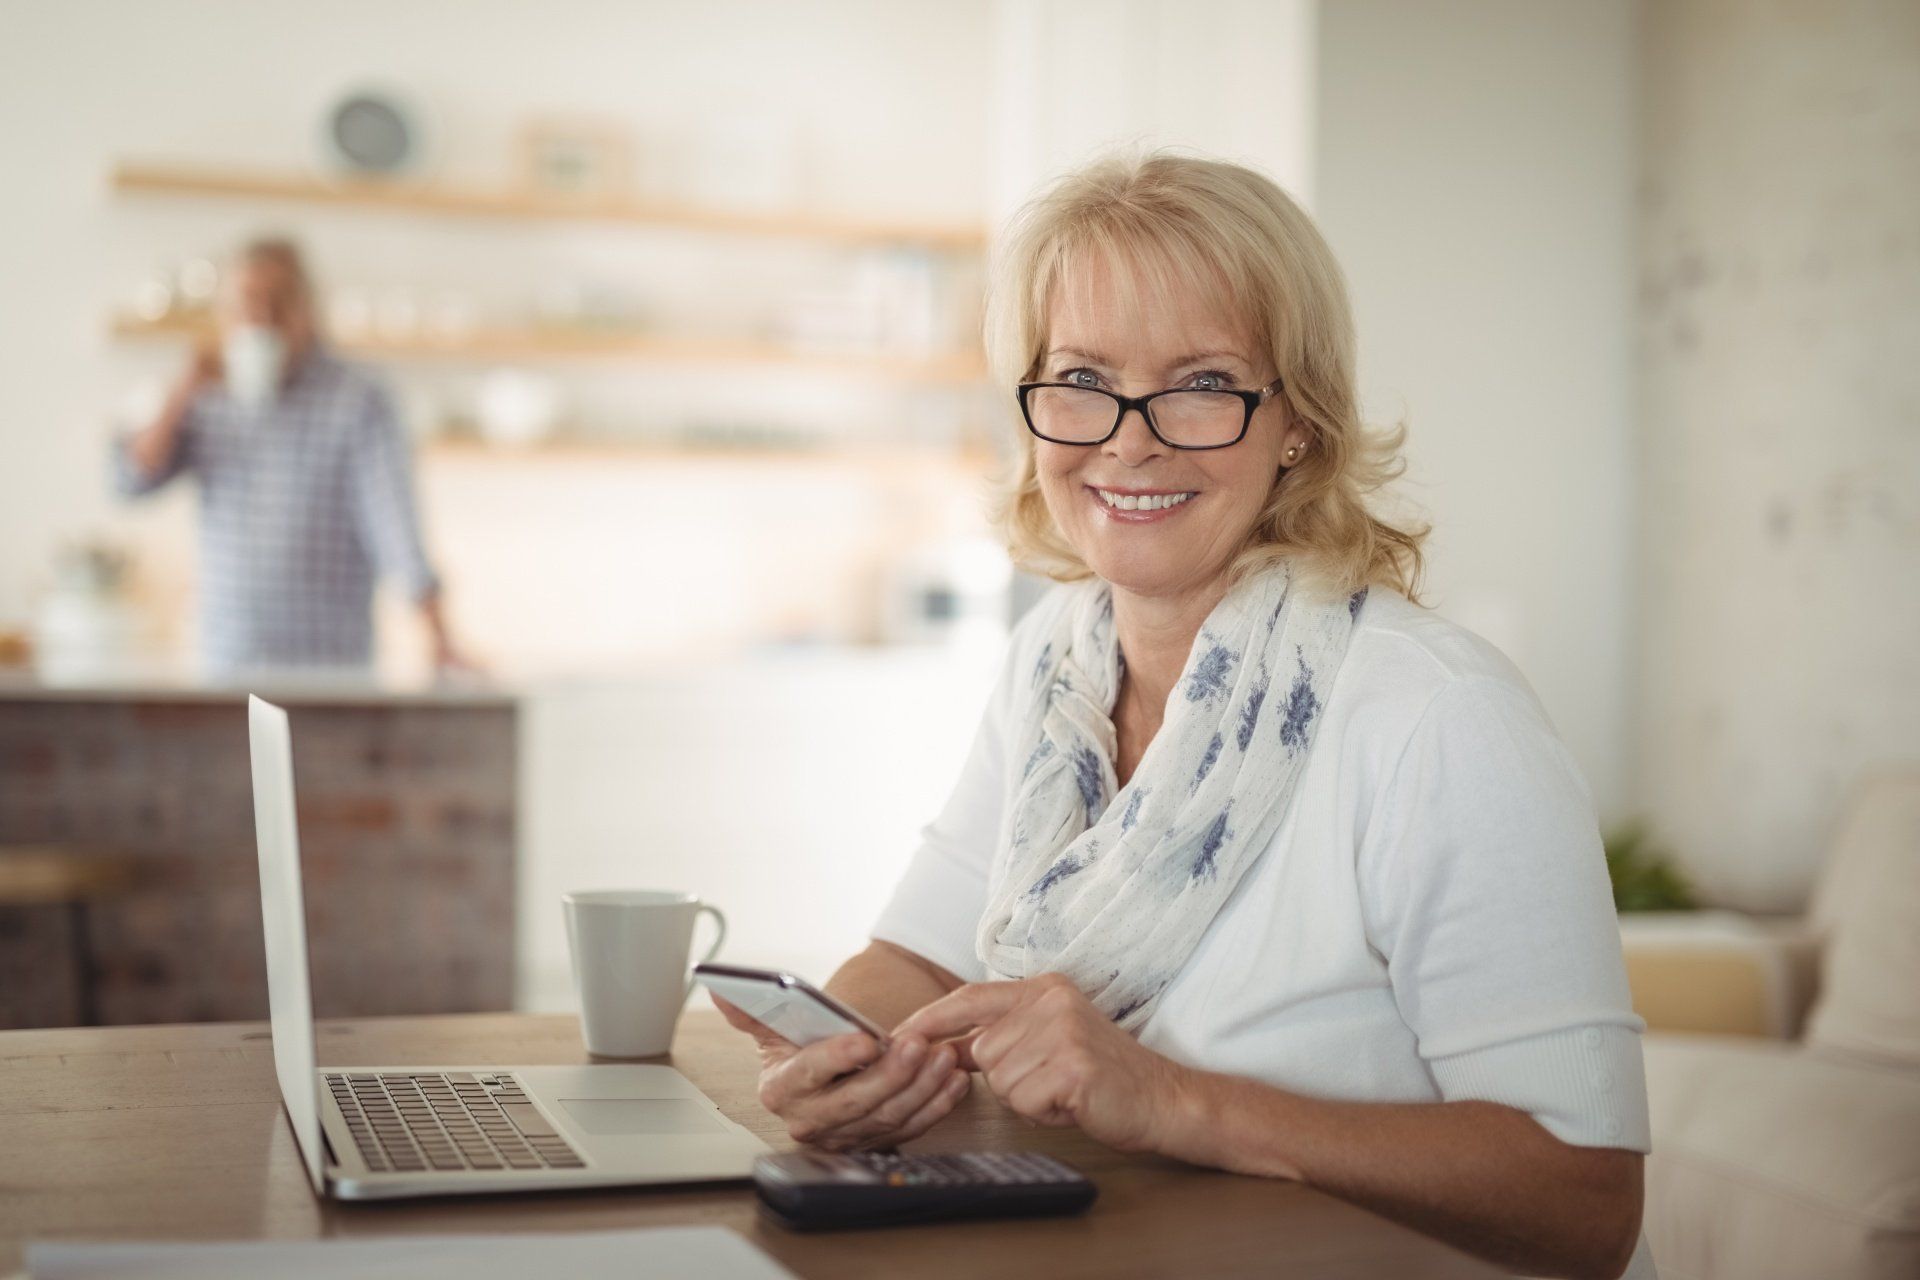 Older lady smiling, wearing glasses sitting at computer